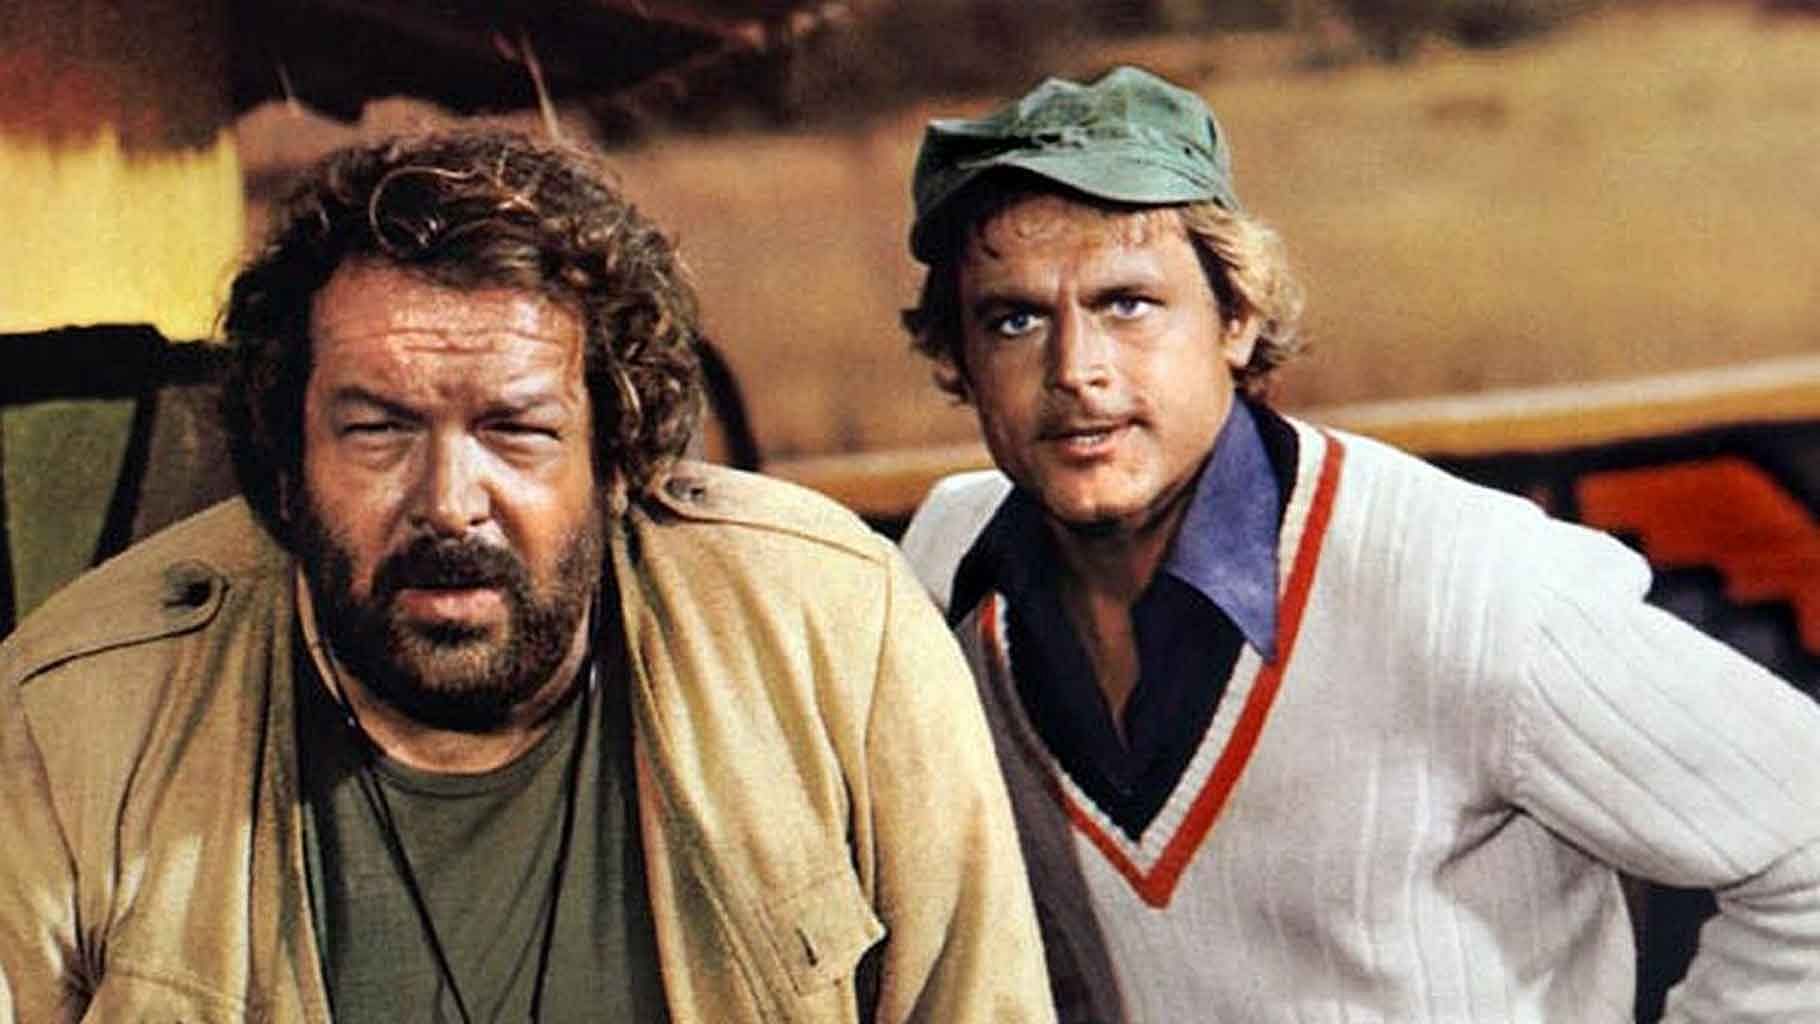 Bud Spencer and Terence Hill. (Photo Courtesy: <a href="http://http://lemerg.com/data/wallpapers/8/929711.jpg">(Imerg.com)</a>